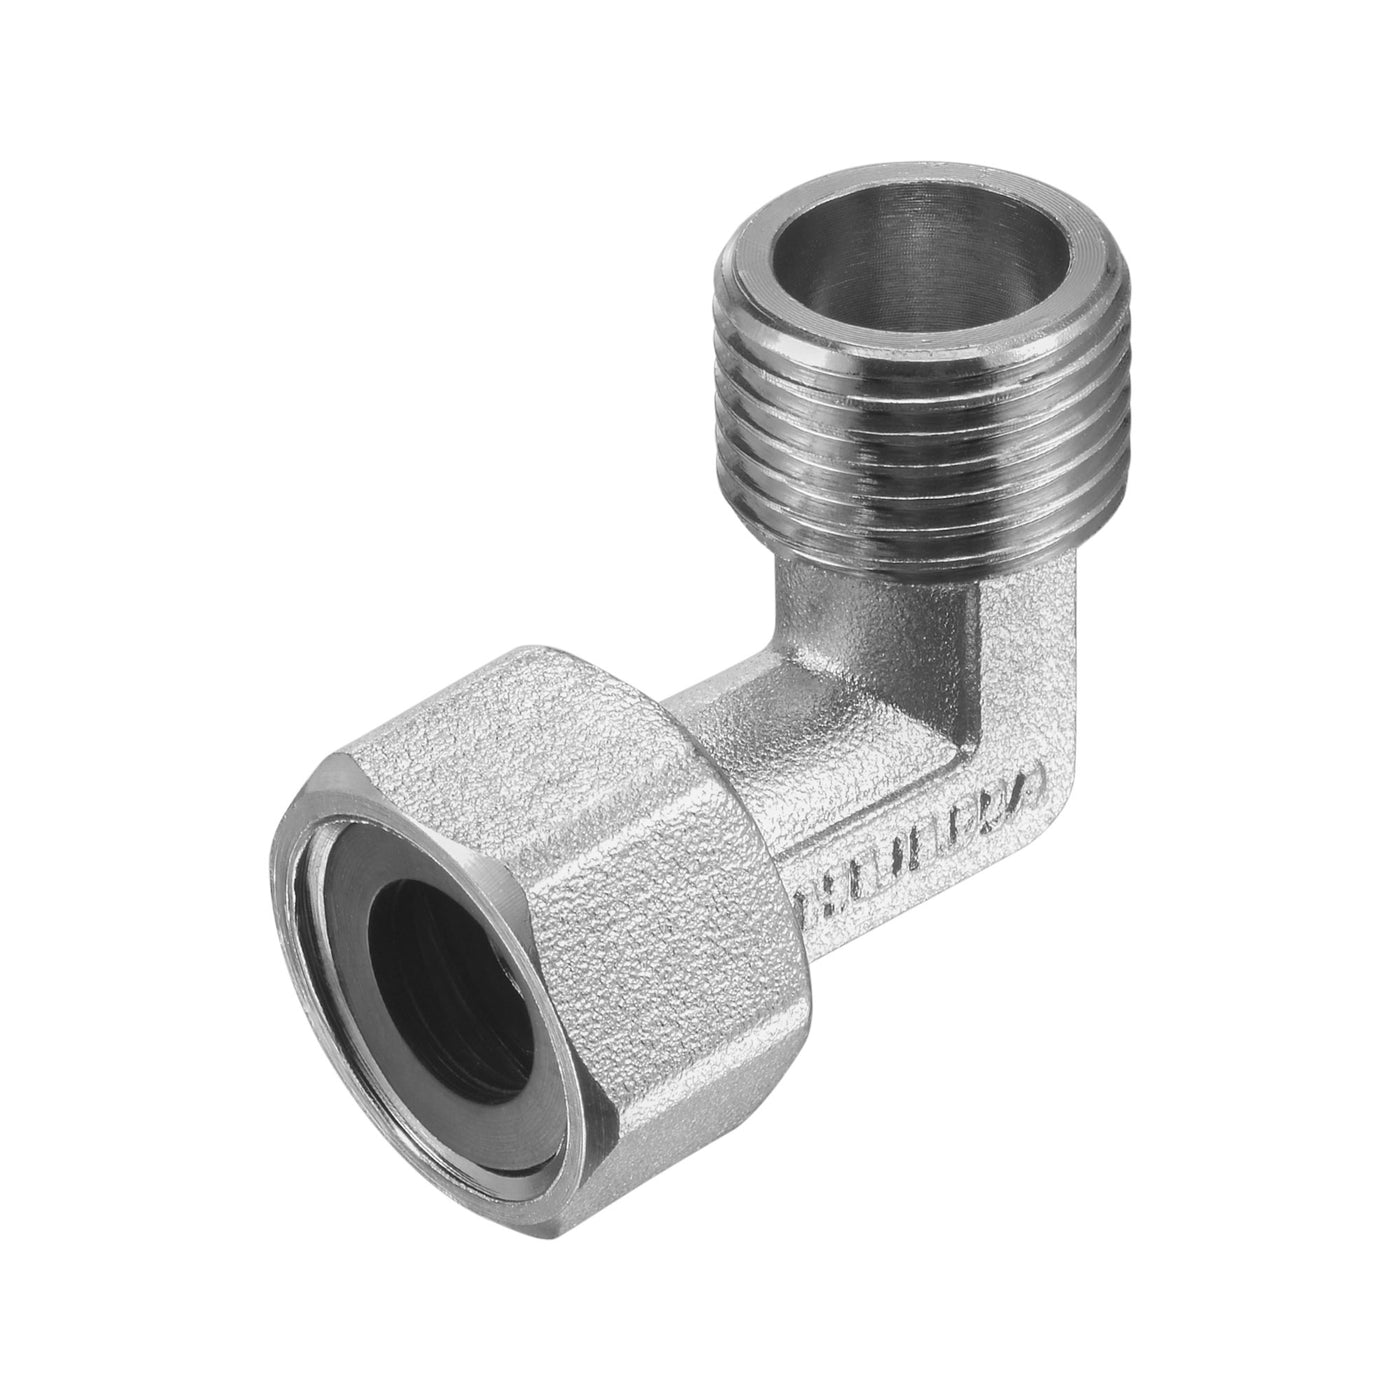 uxcell Pipe Fitting G1/2 1 Female to 2 Male Thread Y Shape 3 Ways